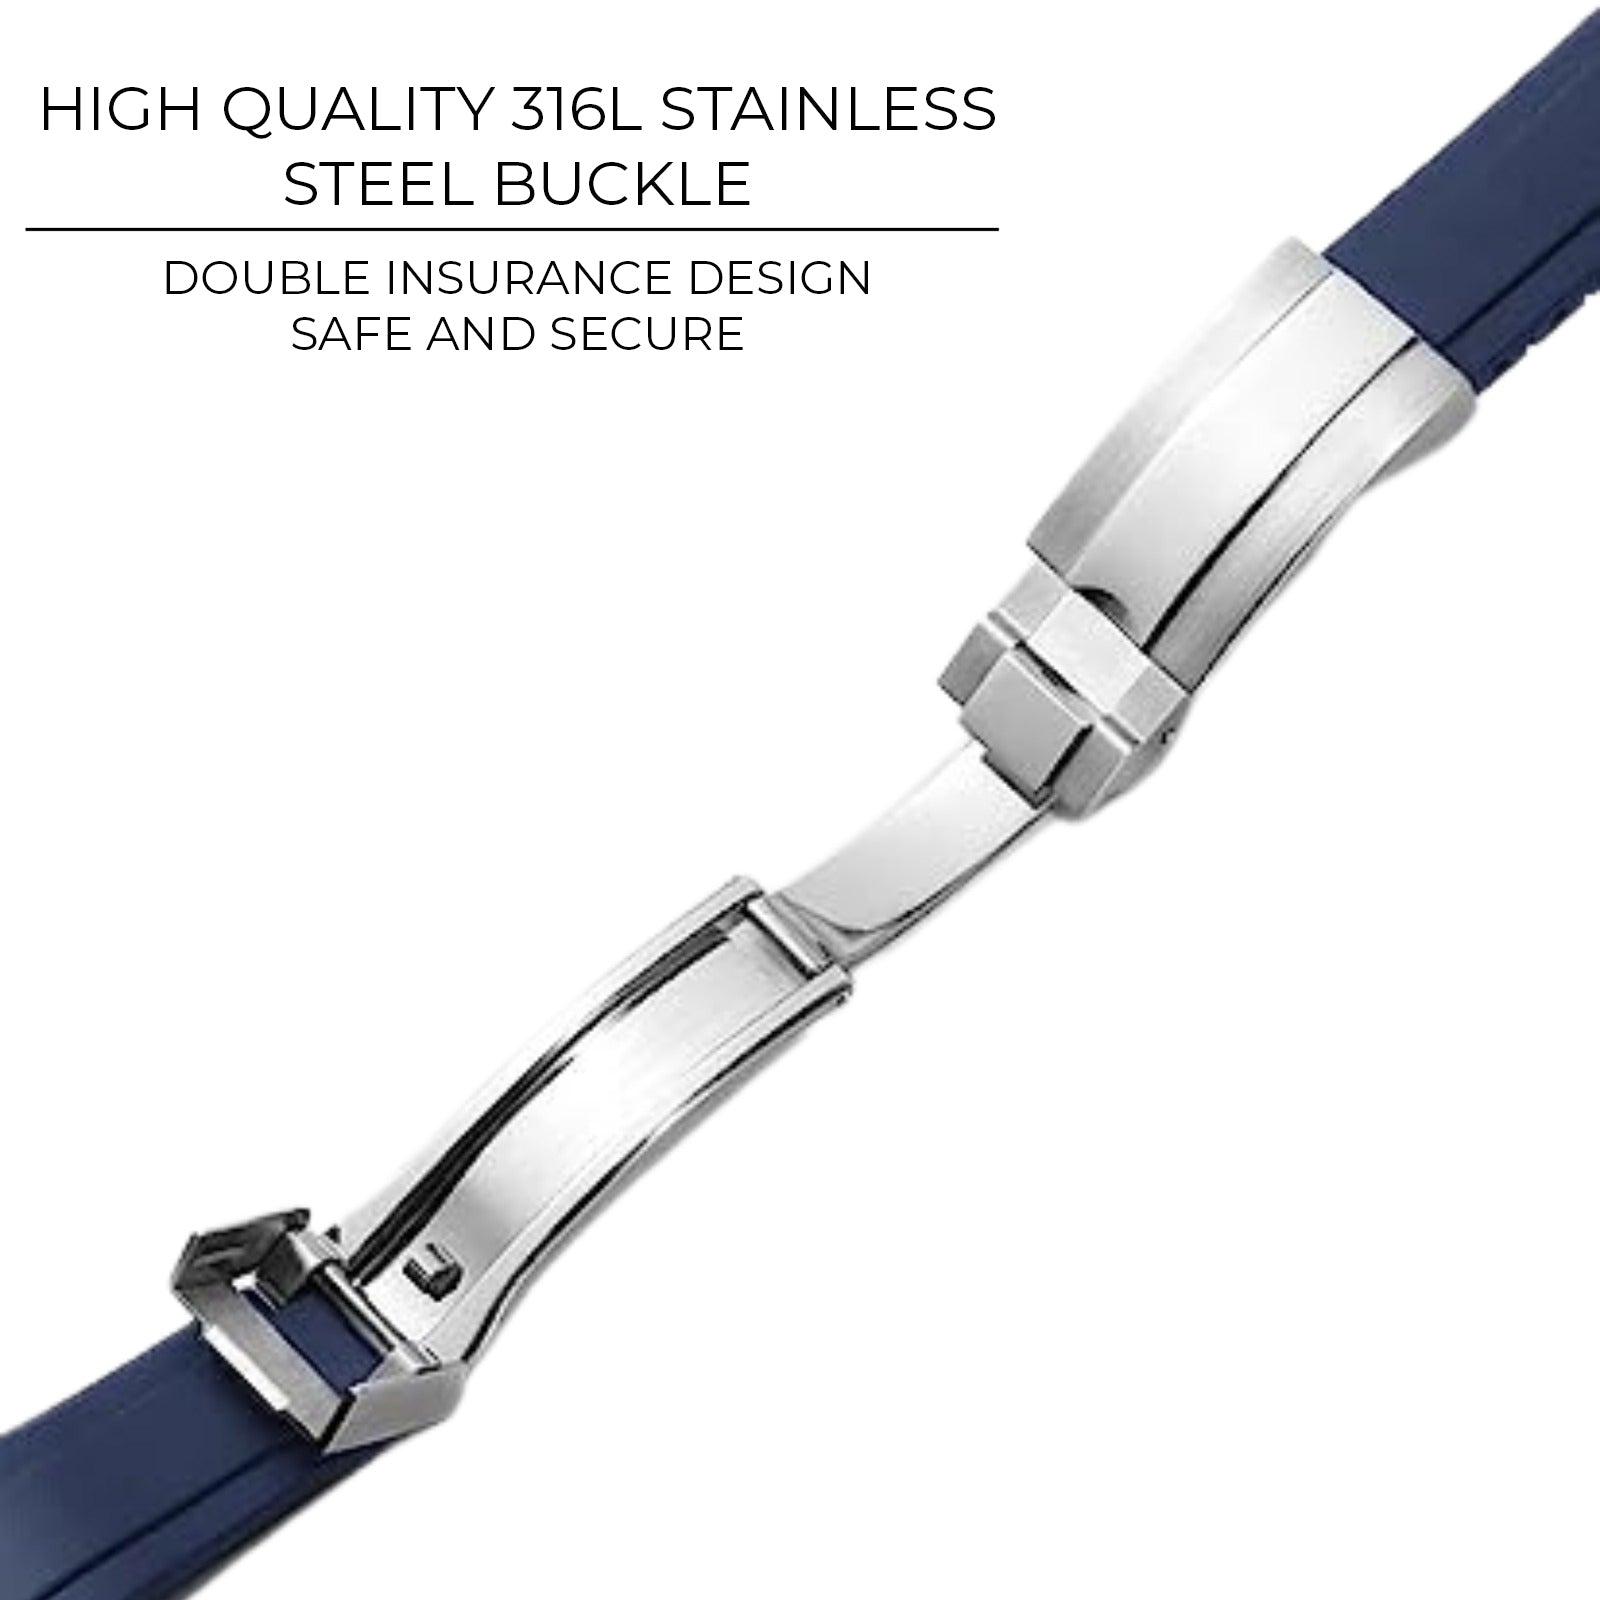 High End Curved FKM Rubber Watch Band - Oyster Style Deployment Clasp: 20 mm- Blue